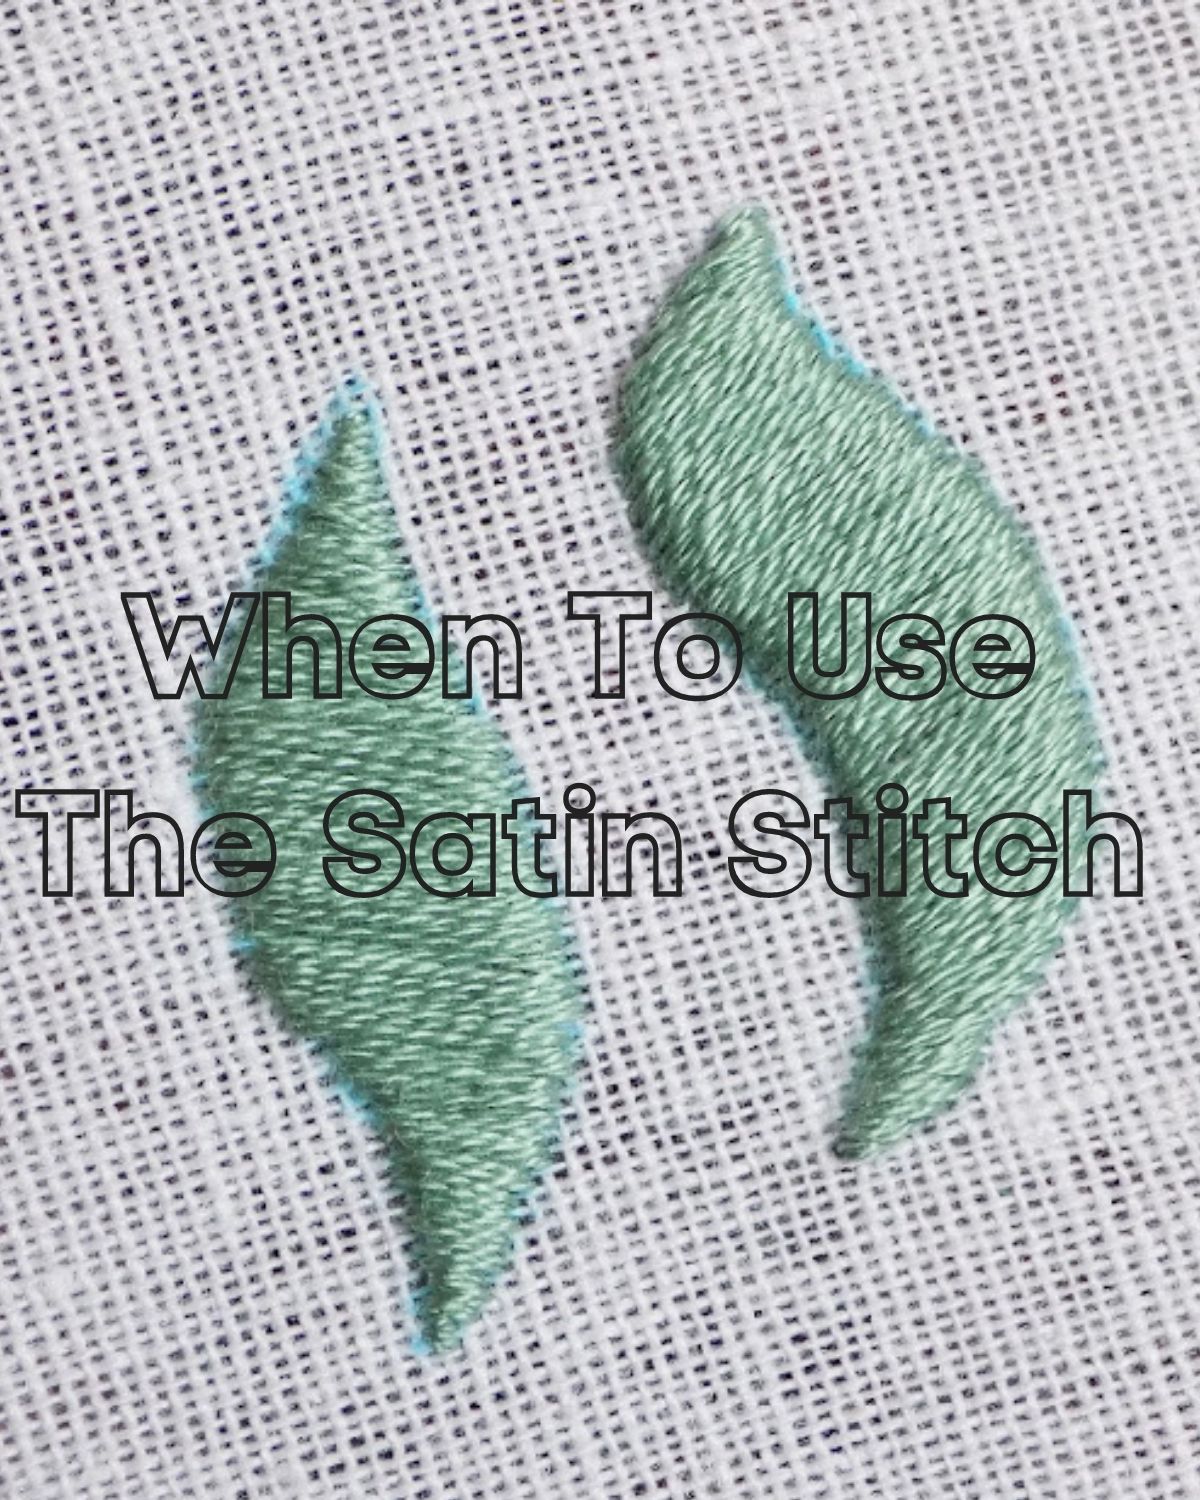 Leaves embroidered with the satin stitch